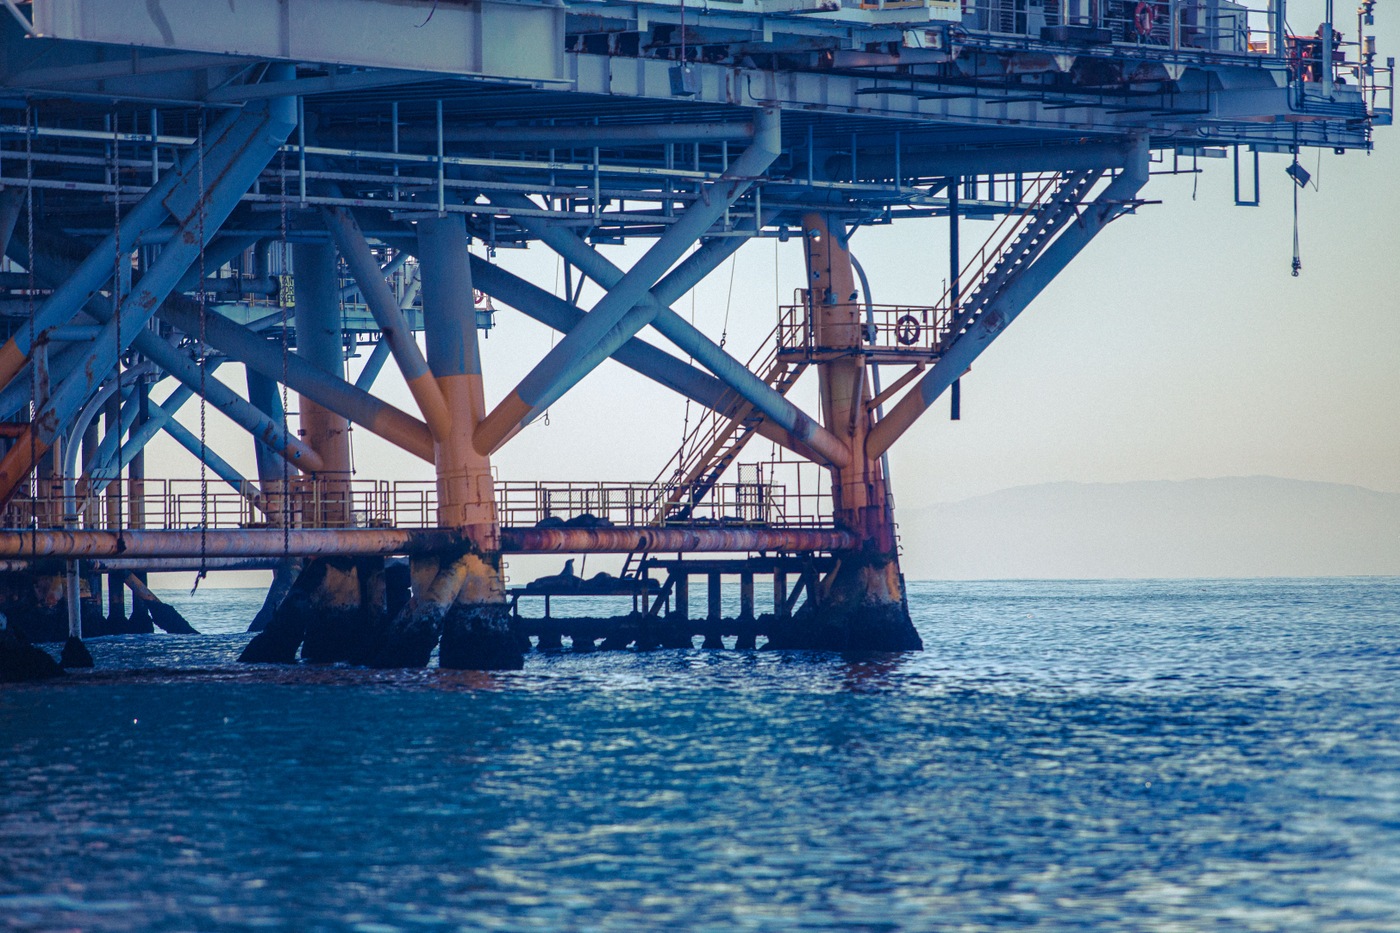 A closeup shot of the base of the oil rig platform, Elly. Seals can be seen congregating on the lower levels.